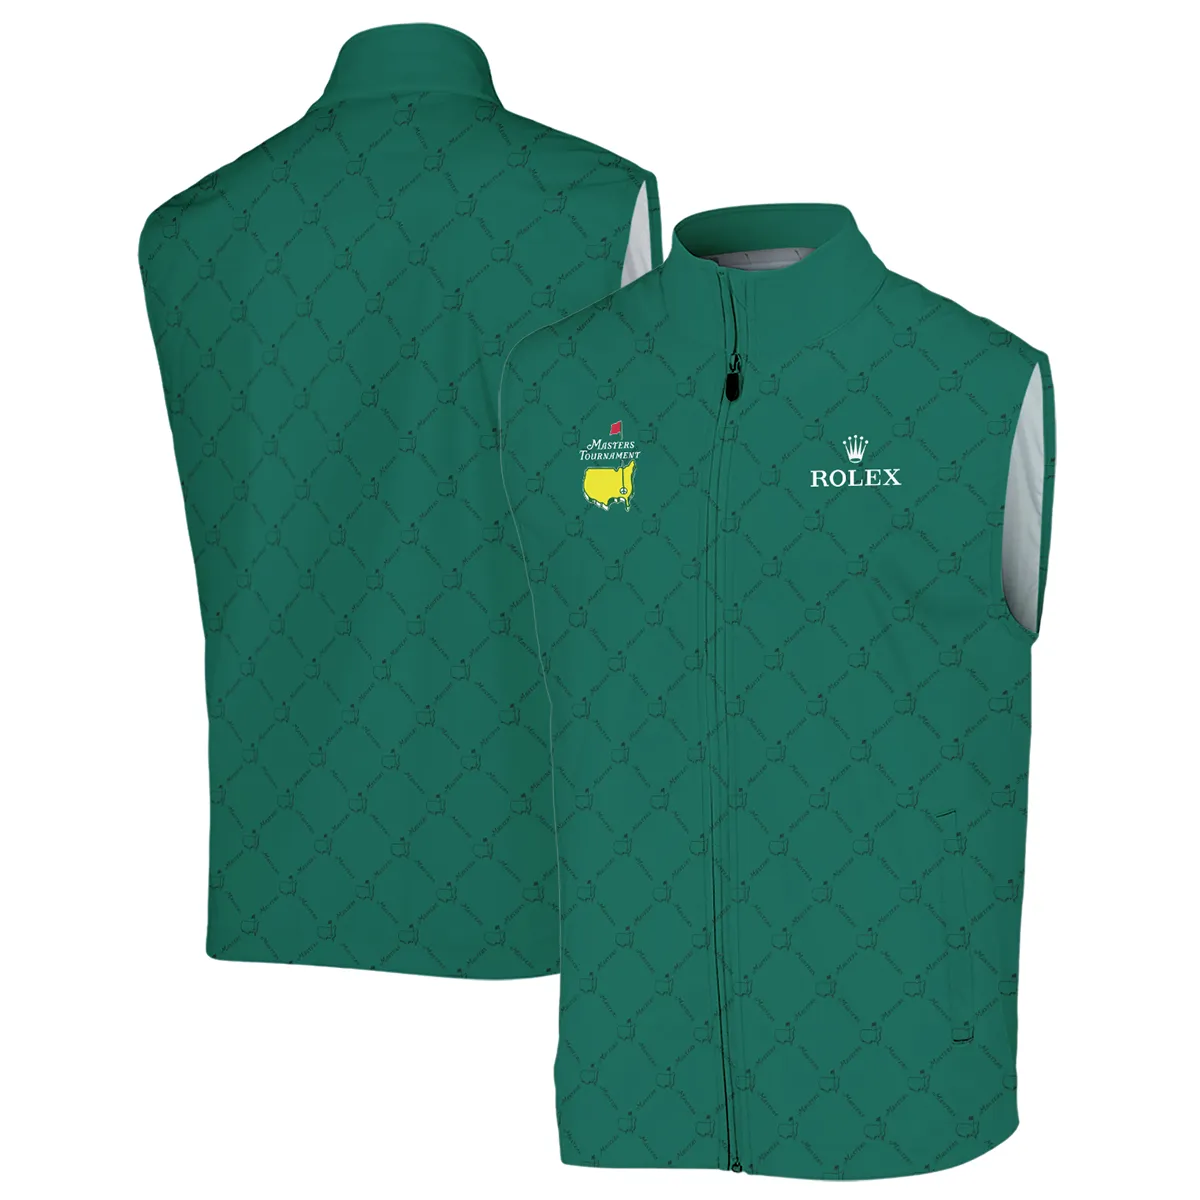 Golf Sport Pattern Color Green Mix Black Masters Tournament Rolex Polo Shirt Style Classic